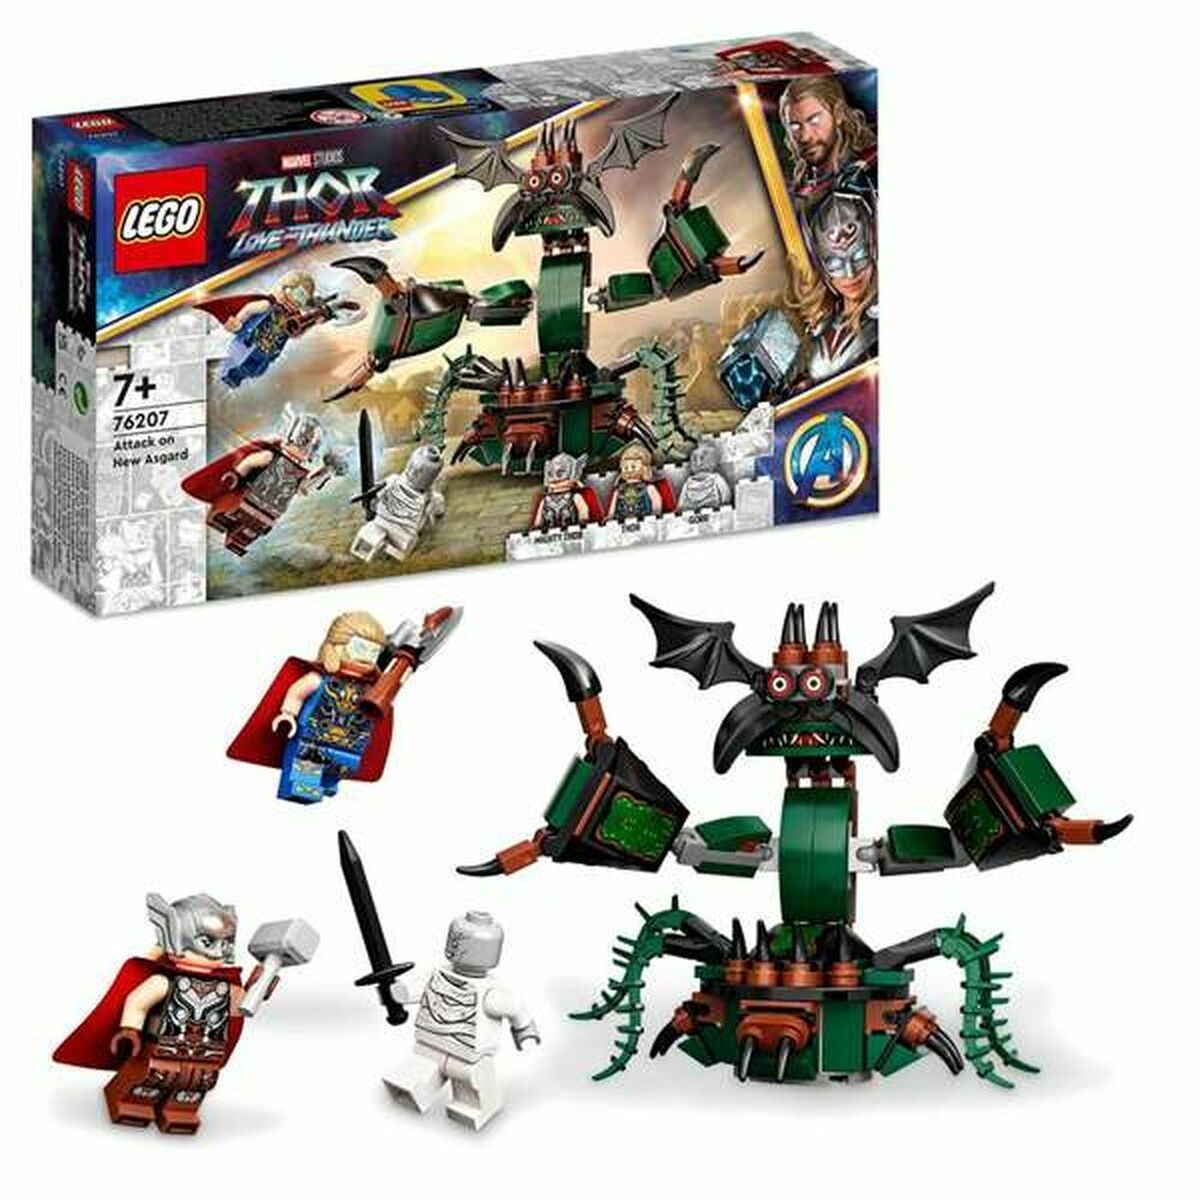 Stavební set Lego Thor Love and Thunder: Attack on New Asgard